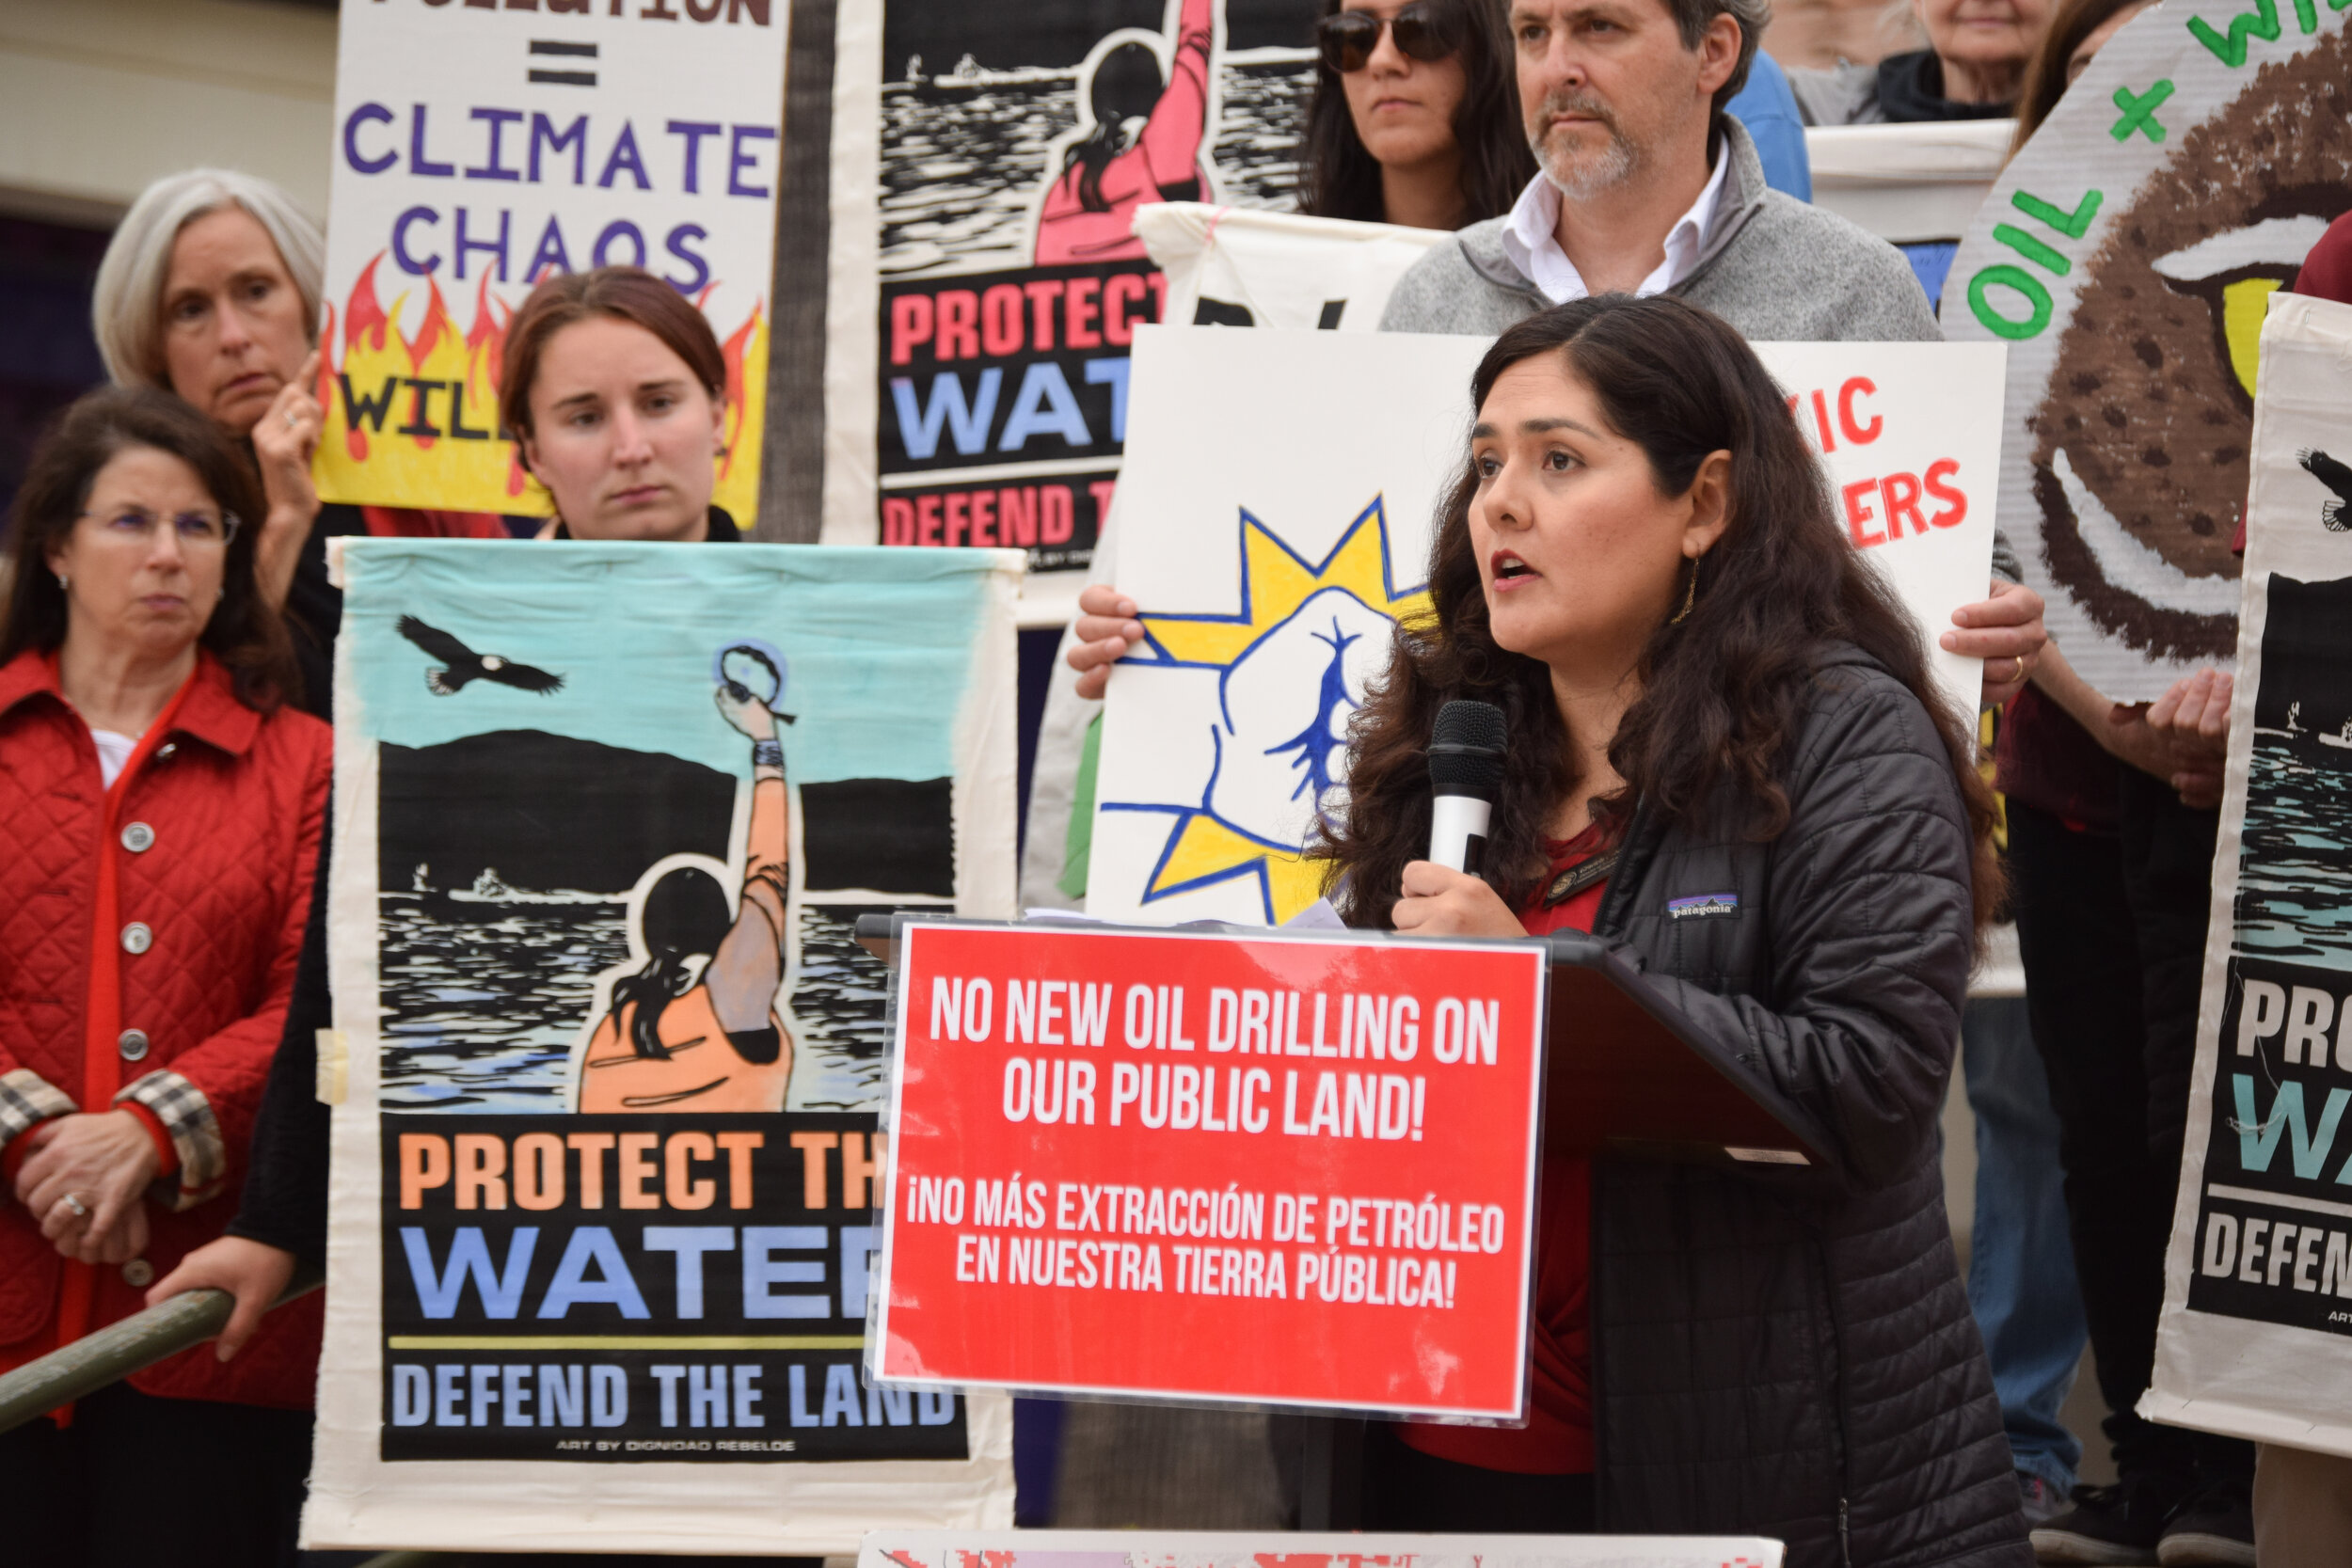  Graciela Cabello, Director of Youth and Community Engagement for Los Padres ForestWatch, leads a rally outside of a Bureau of Land Management Hearing on opening up public lands to oil drilling.  